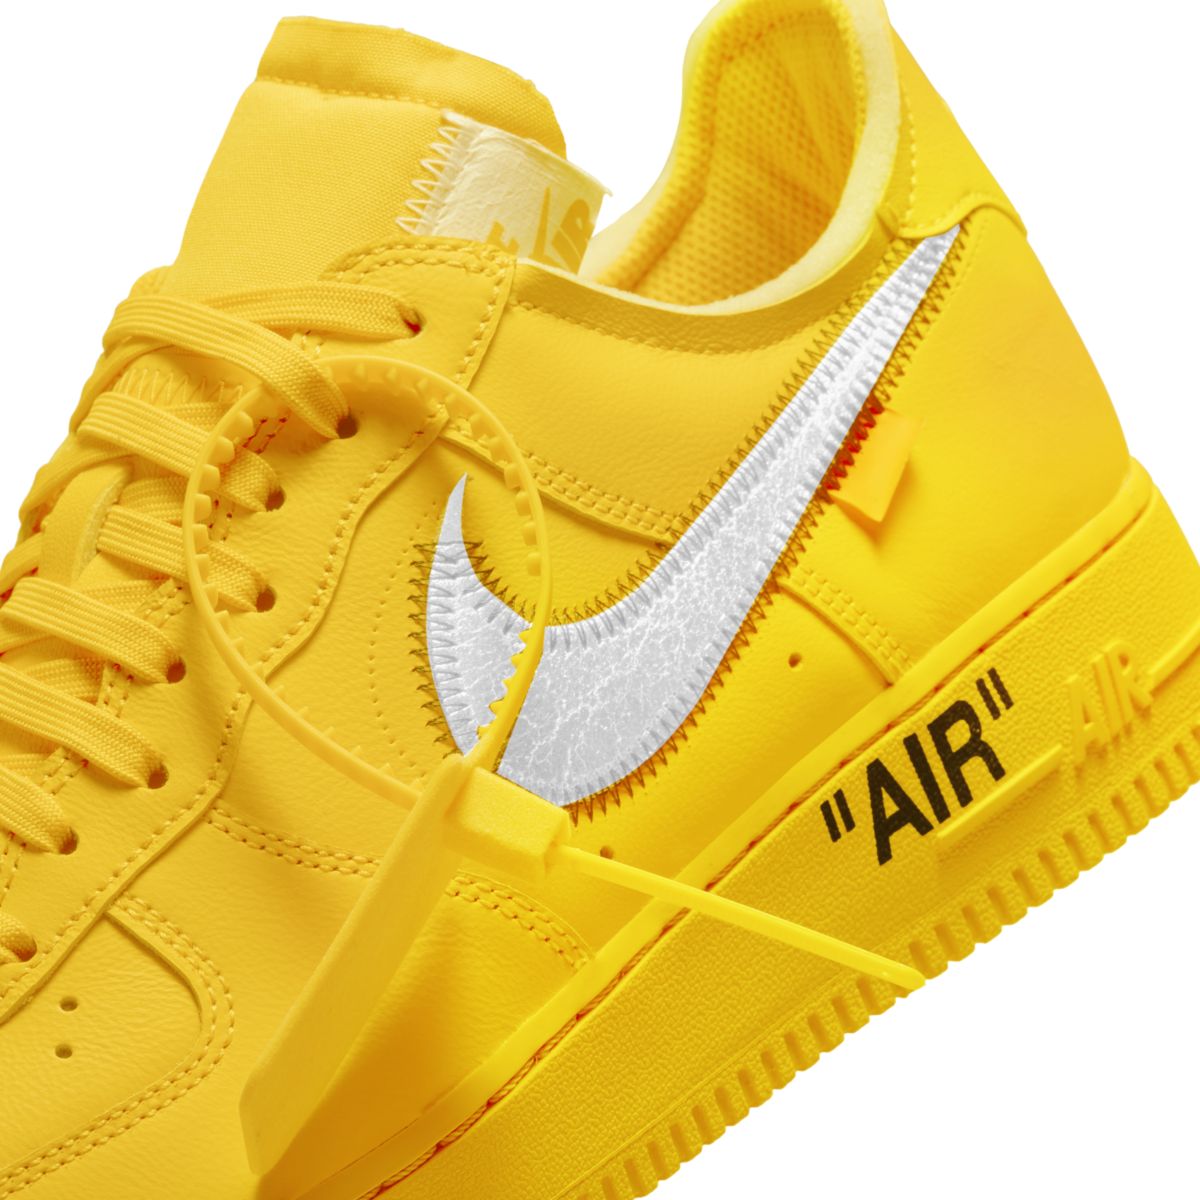 Off-White x Nike Air Force 1 Low University Gold DD1876-700 9